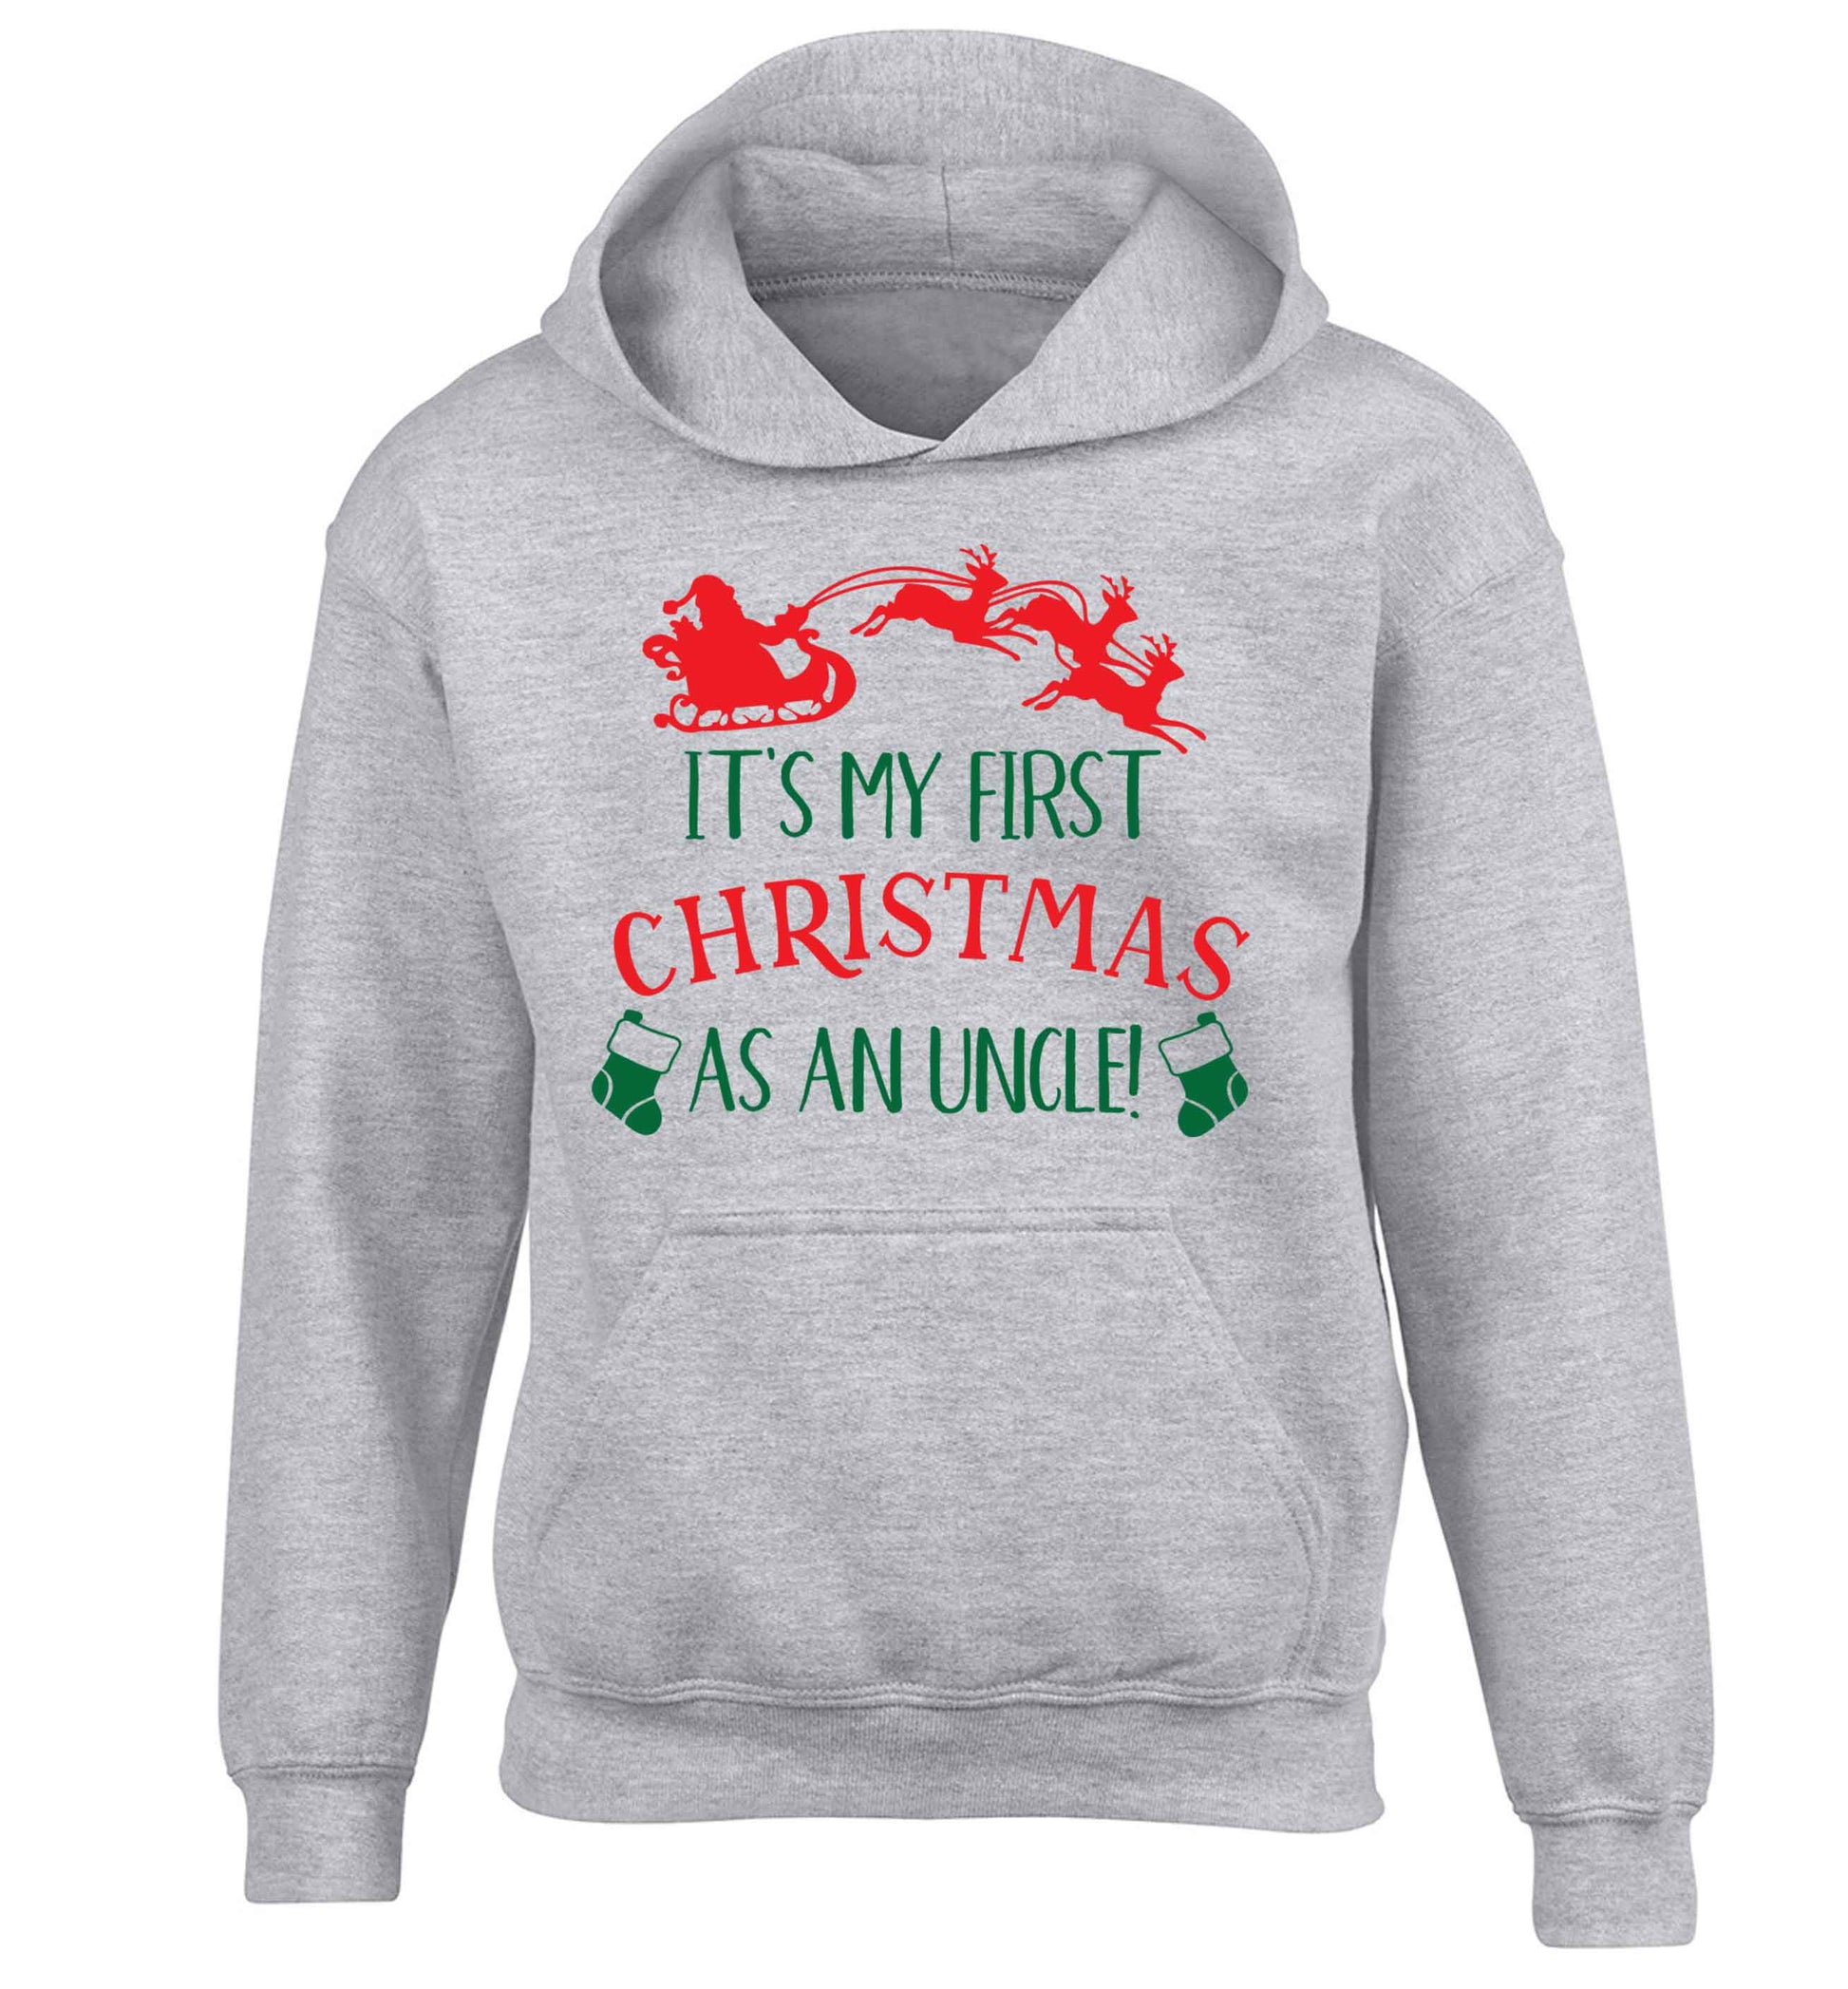 It's my first Christmas as an uncle! children's grey hoodie 12-13 Years